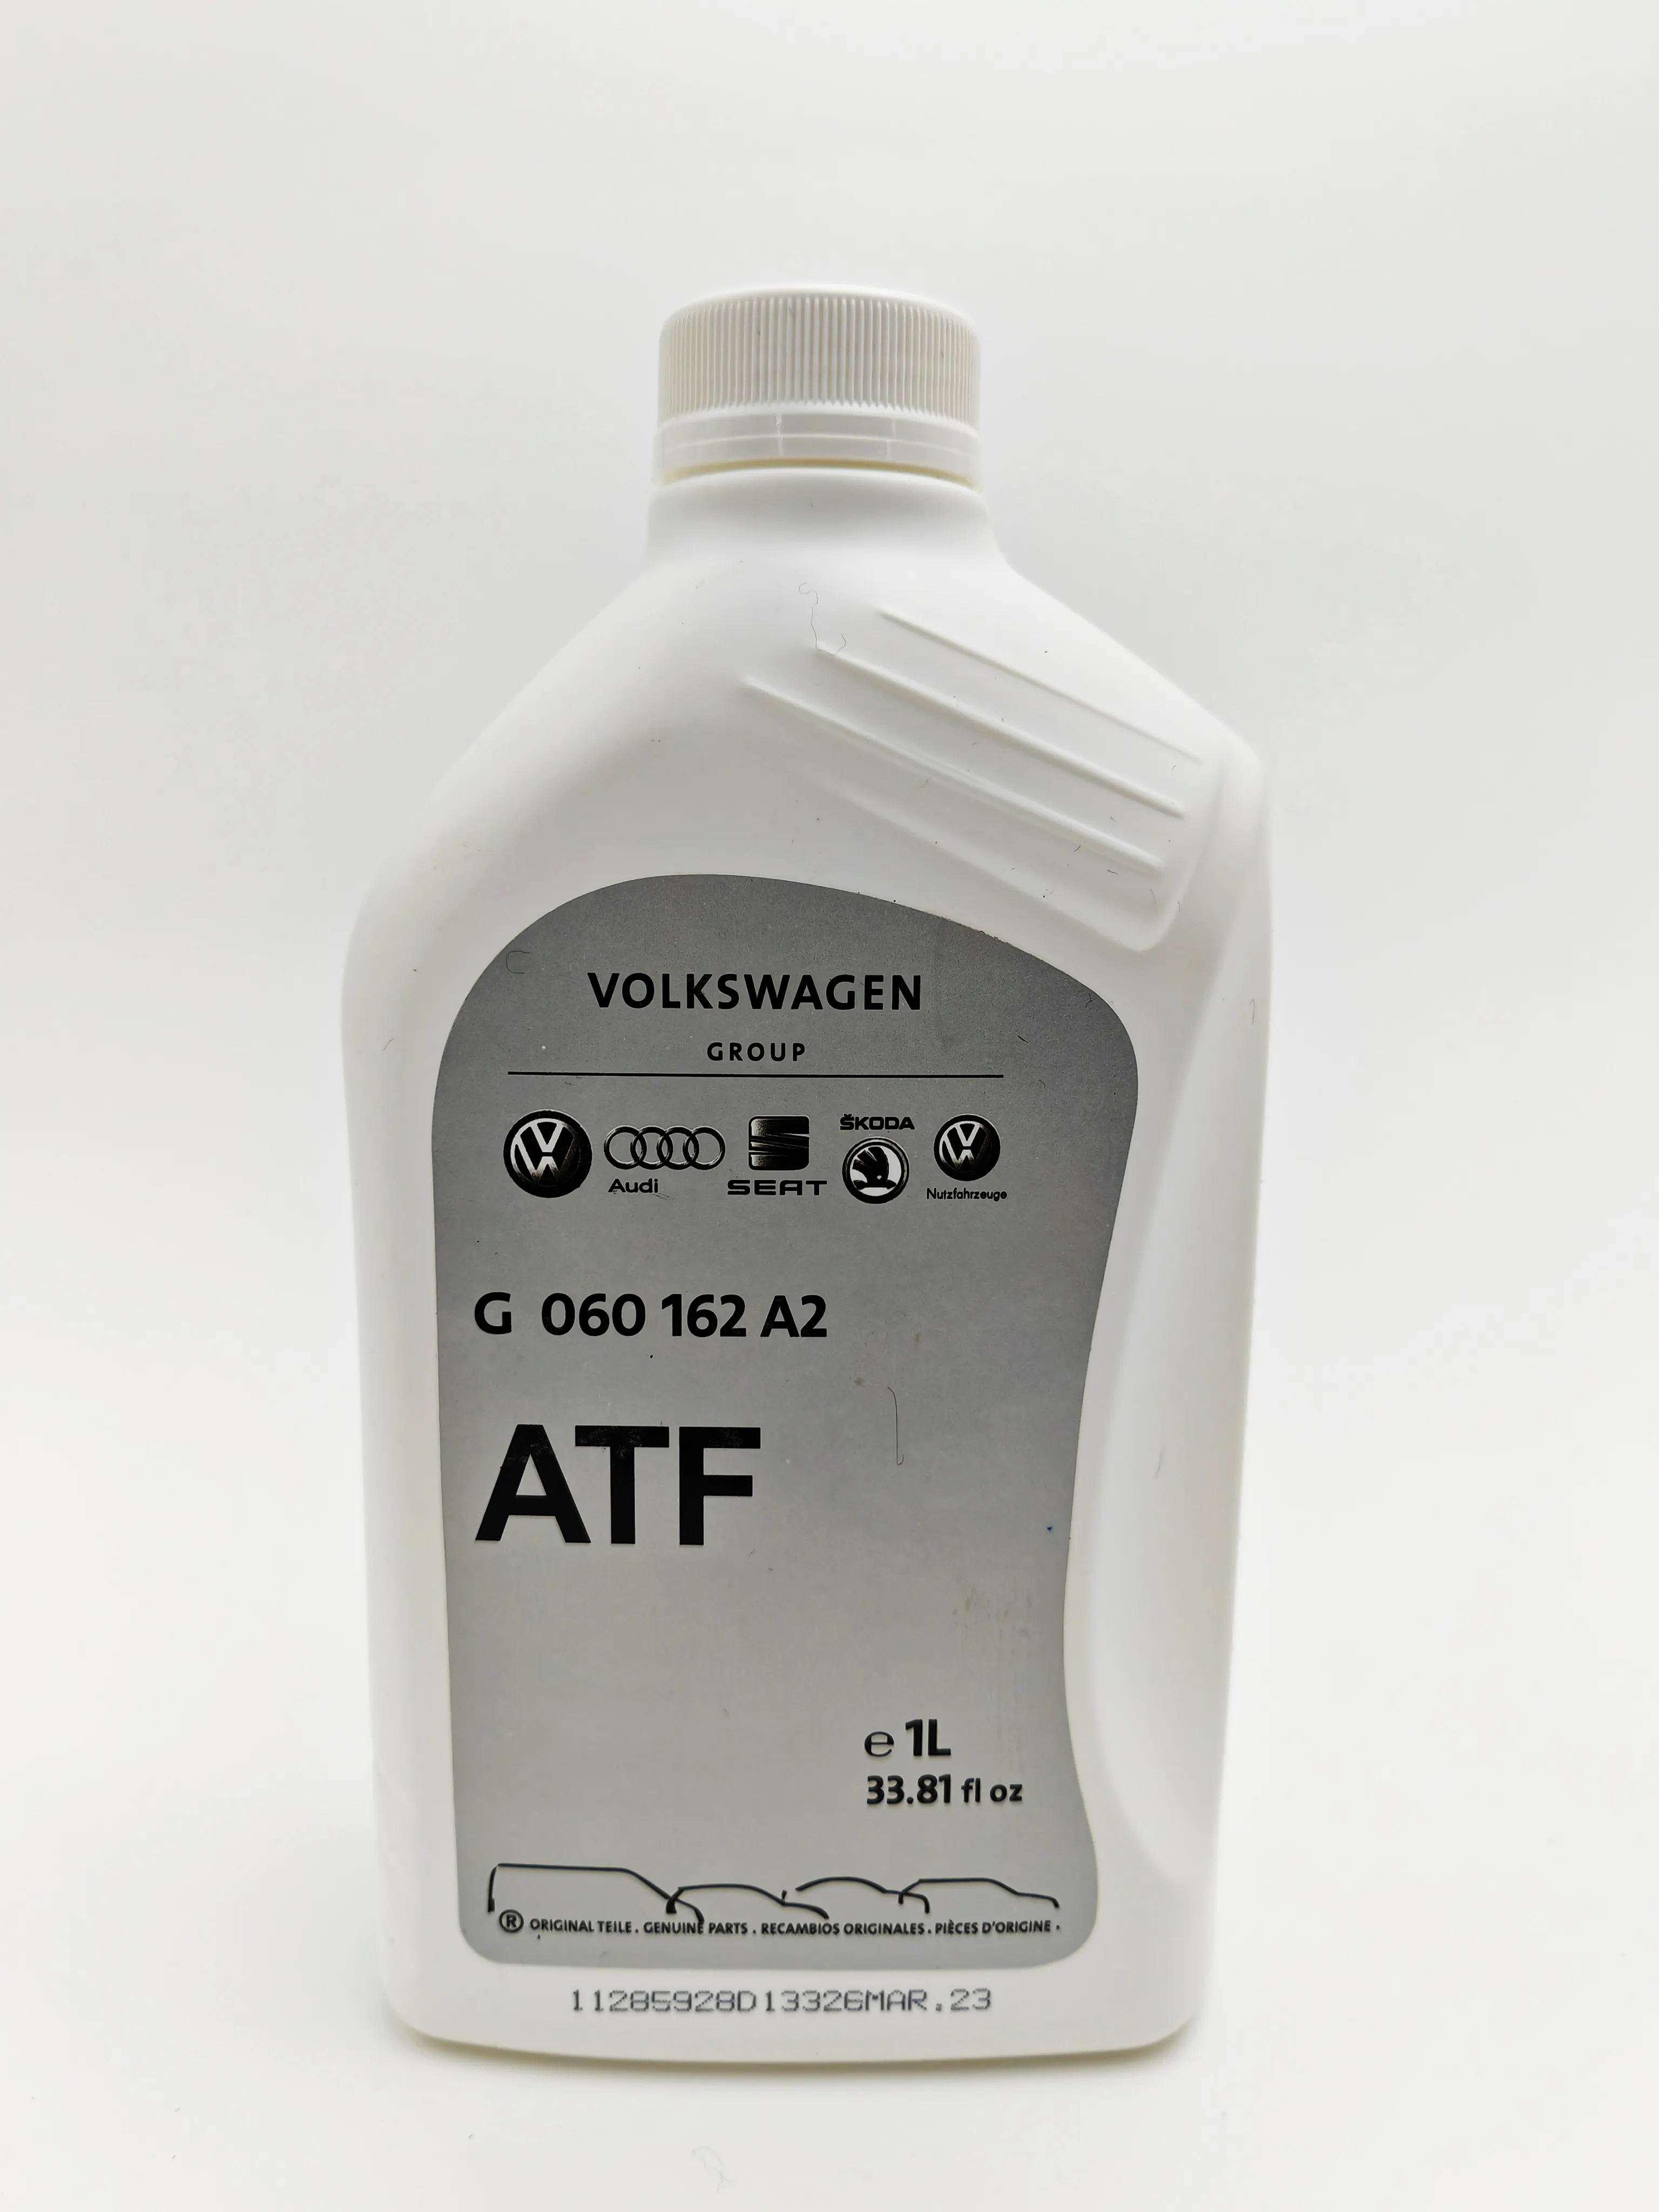 Full Synthetic Automatic VW ATF G 060 162 A2 Transmission Fluid ATF 1 Liter Package for Passenger Motor Car